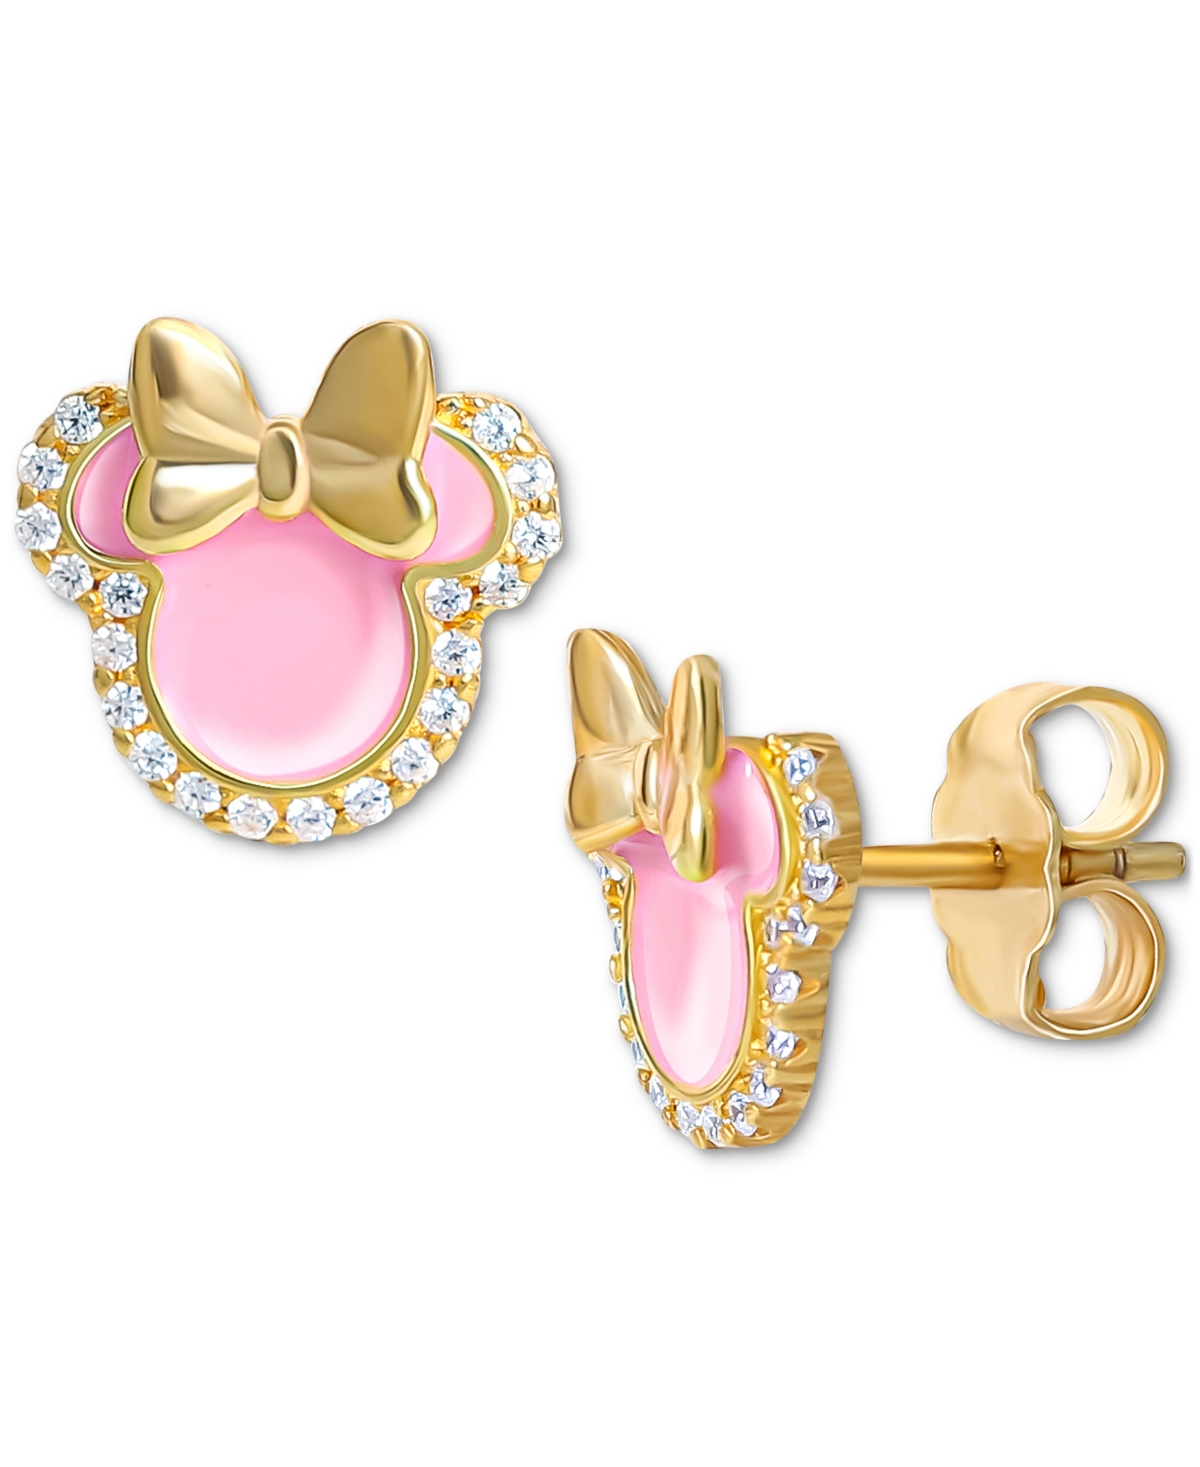 Disney Cubic Zirconia & Pink Enamel Minnie Mouse Stud Earrings In 18k Gold-plated Sterling Silver In Gold Over Silver